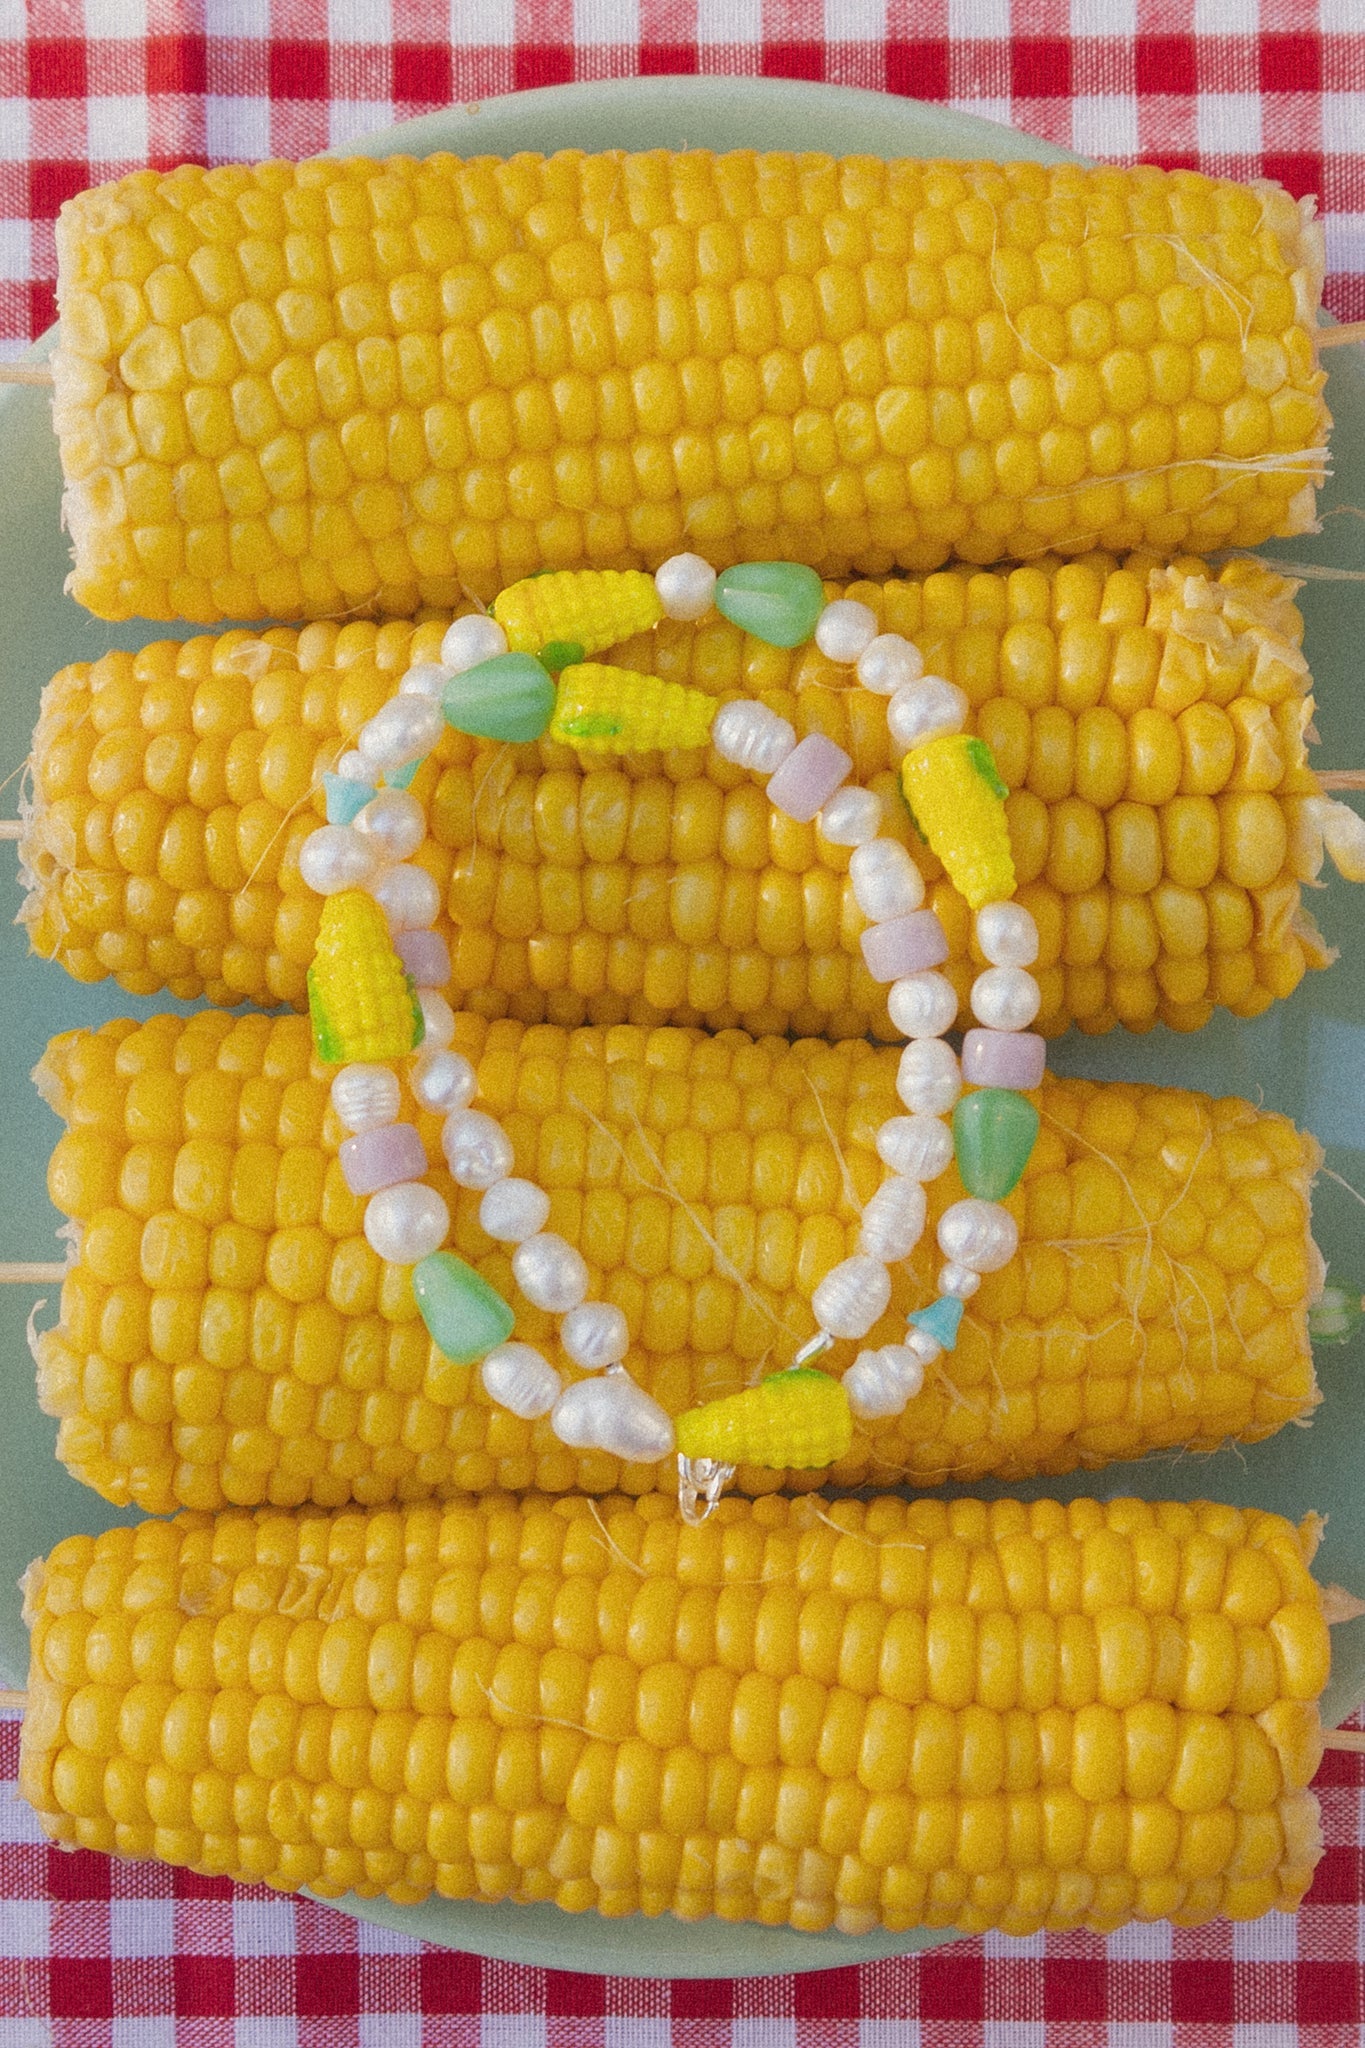 Corn on the cob Necklace